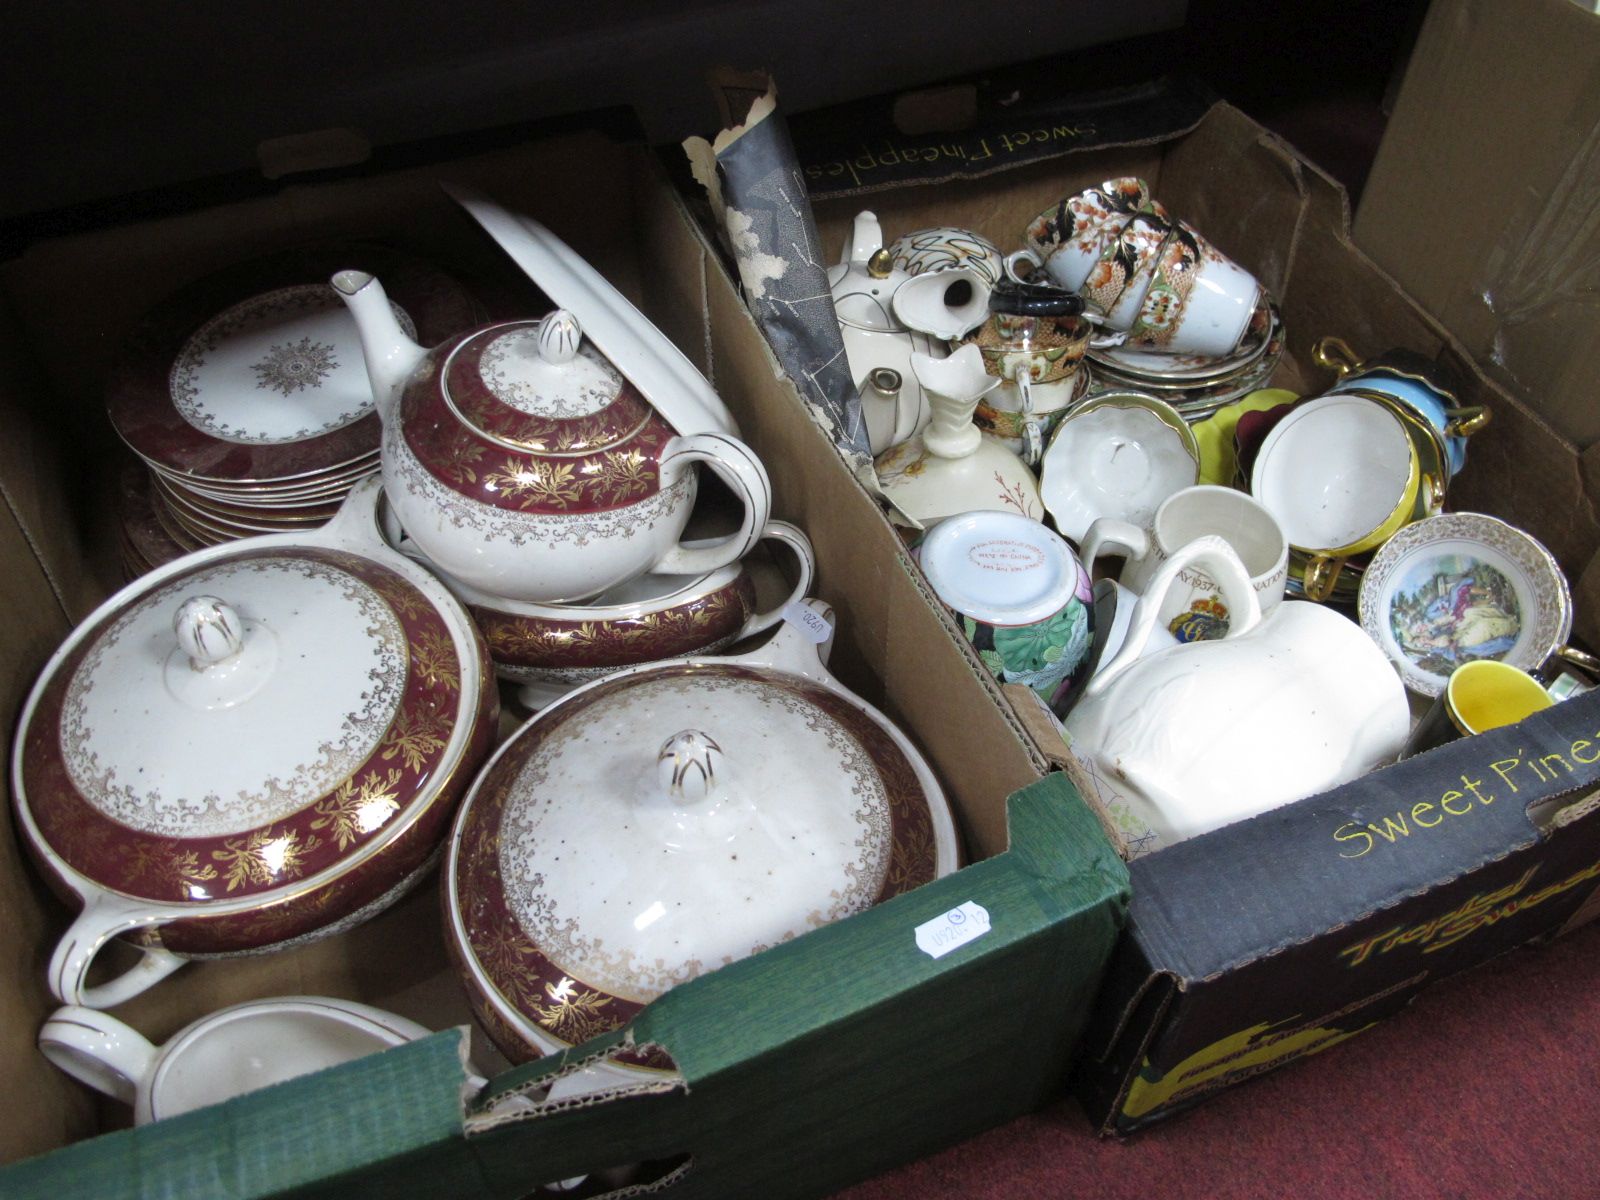 Meakin 'Sol' Dinner ware, other ceramics:- Three Boxes.